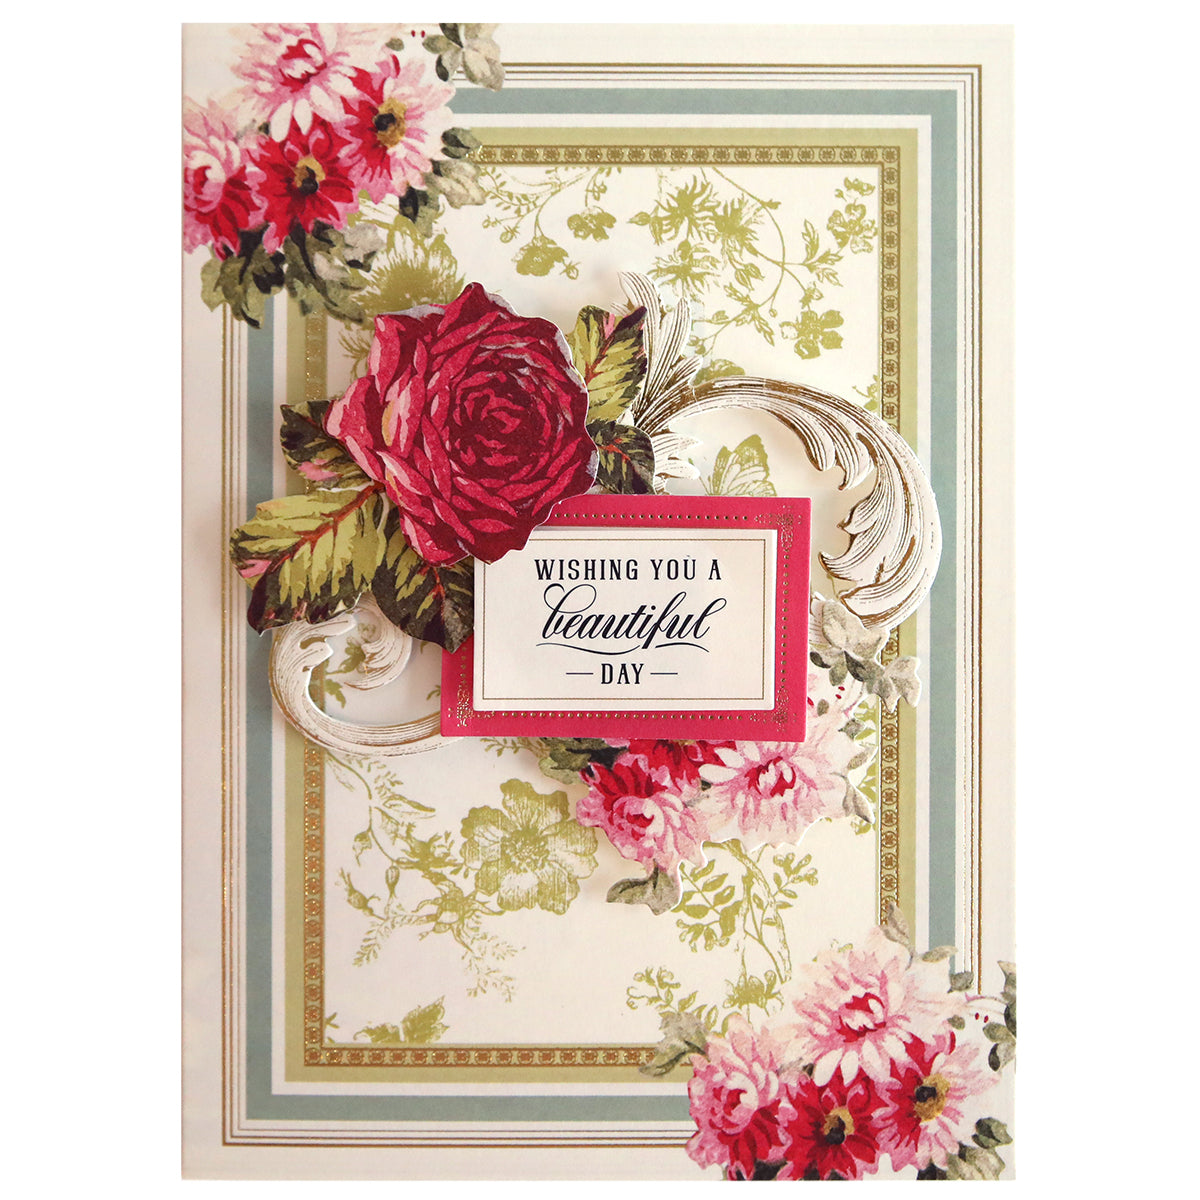 A Folded Flower Birthday Card Kit featuring floral patterns, a central ornate golden swirl design, and the message "wishing you a beautiful day" framed in a pink box.